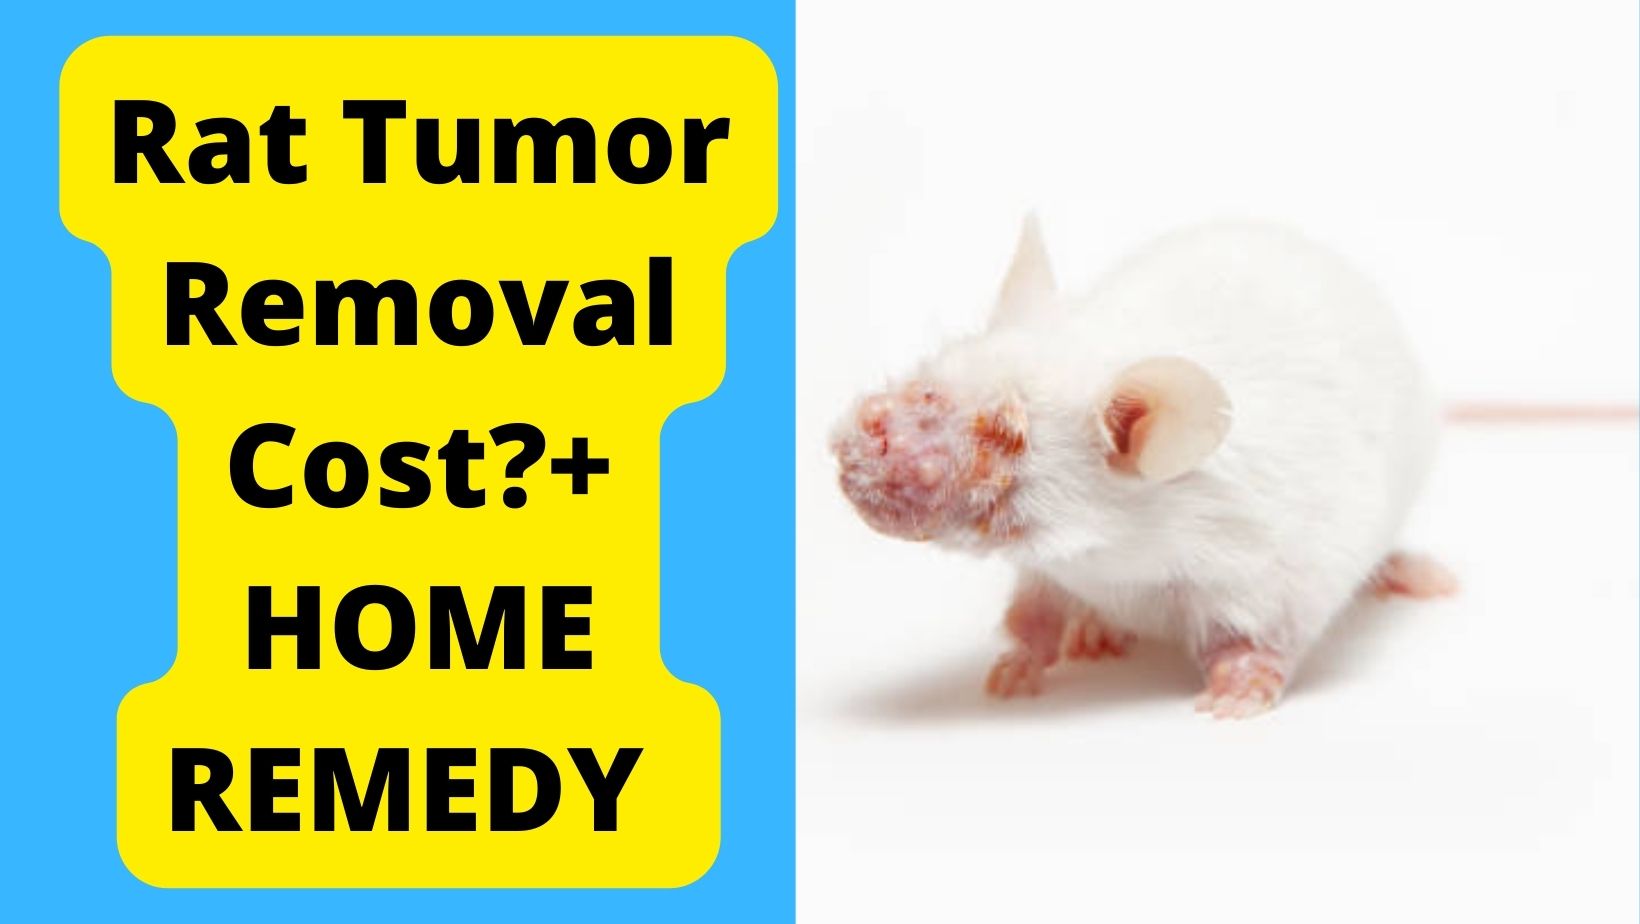 Rat Tumor Removal Cost?+ 3 HOME REMEDY FIX!